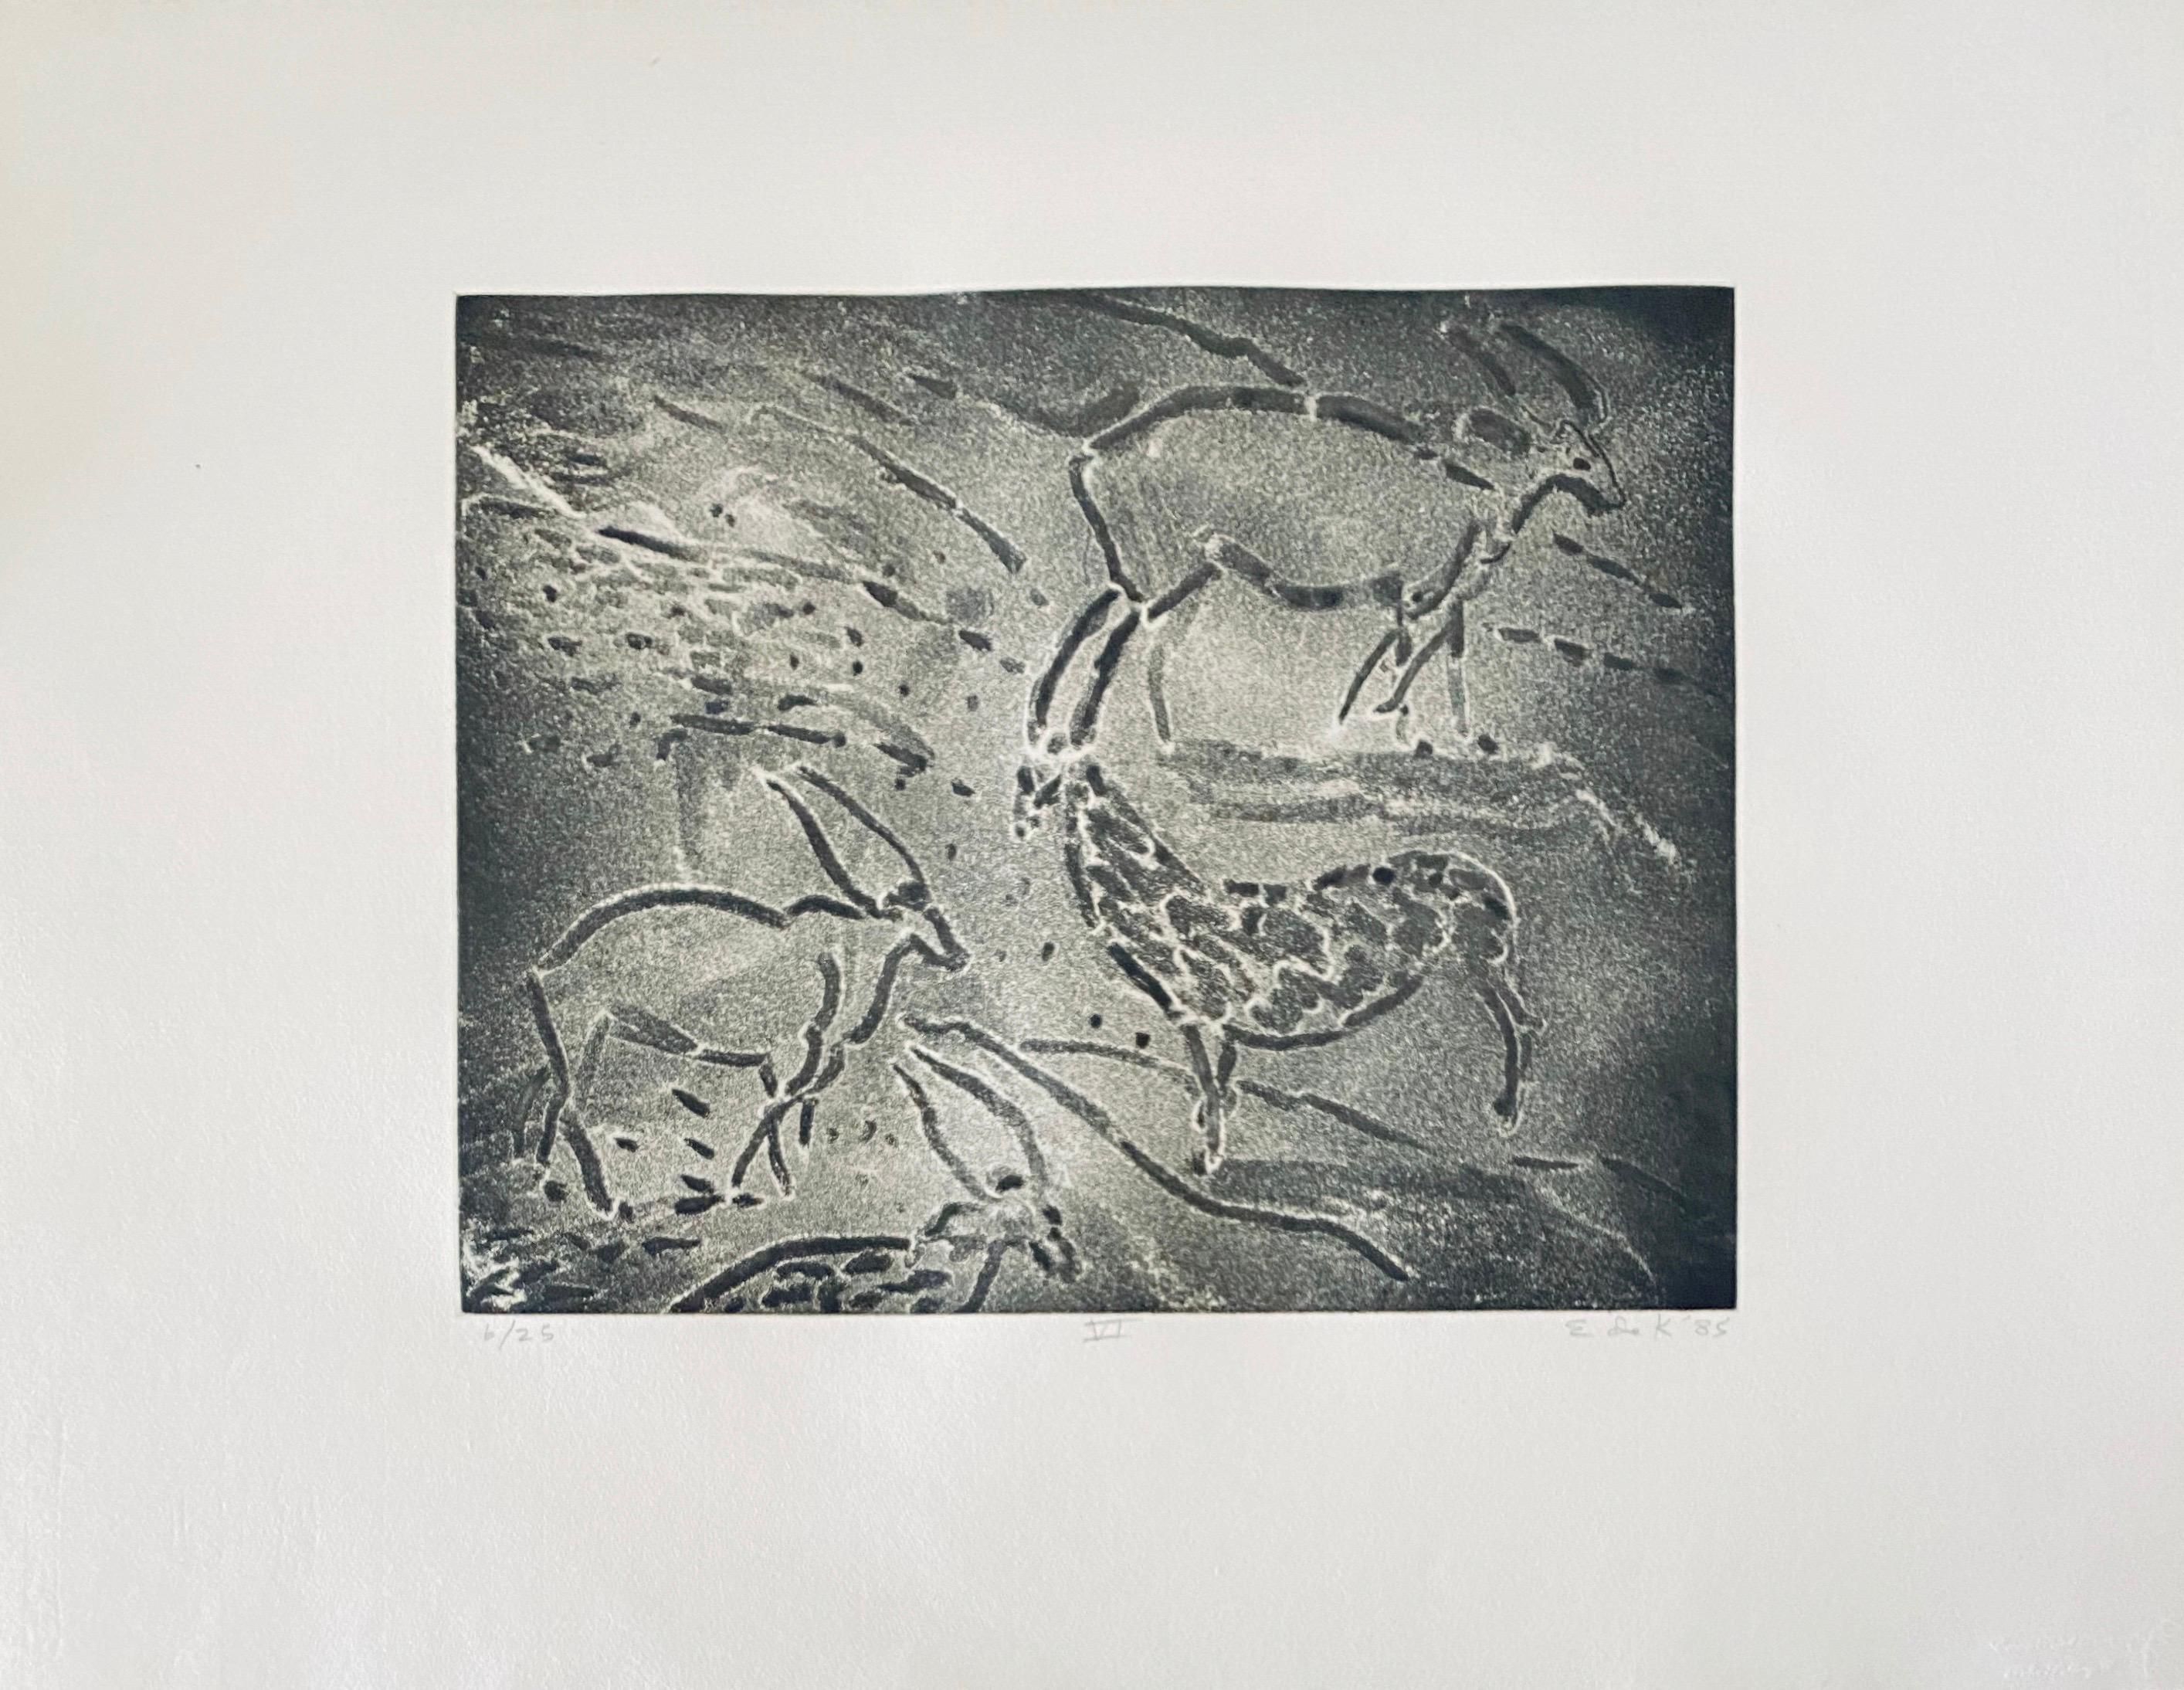 Aquatint etching. Crown Point Press, San Francisco. Edition of 25 
Hand signed in pencil. Torchlight Cave Drawing
Image size: seven measure 12 x 15